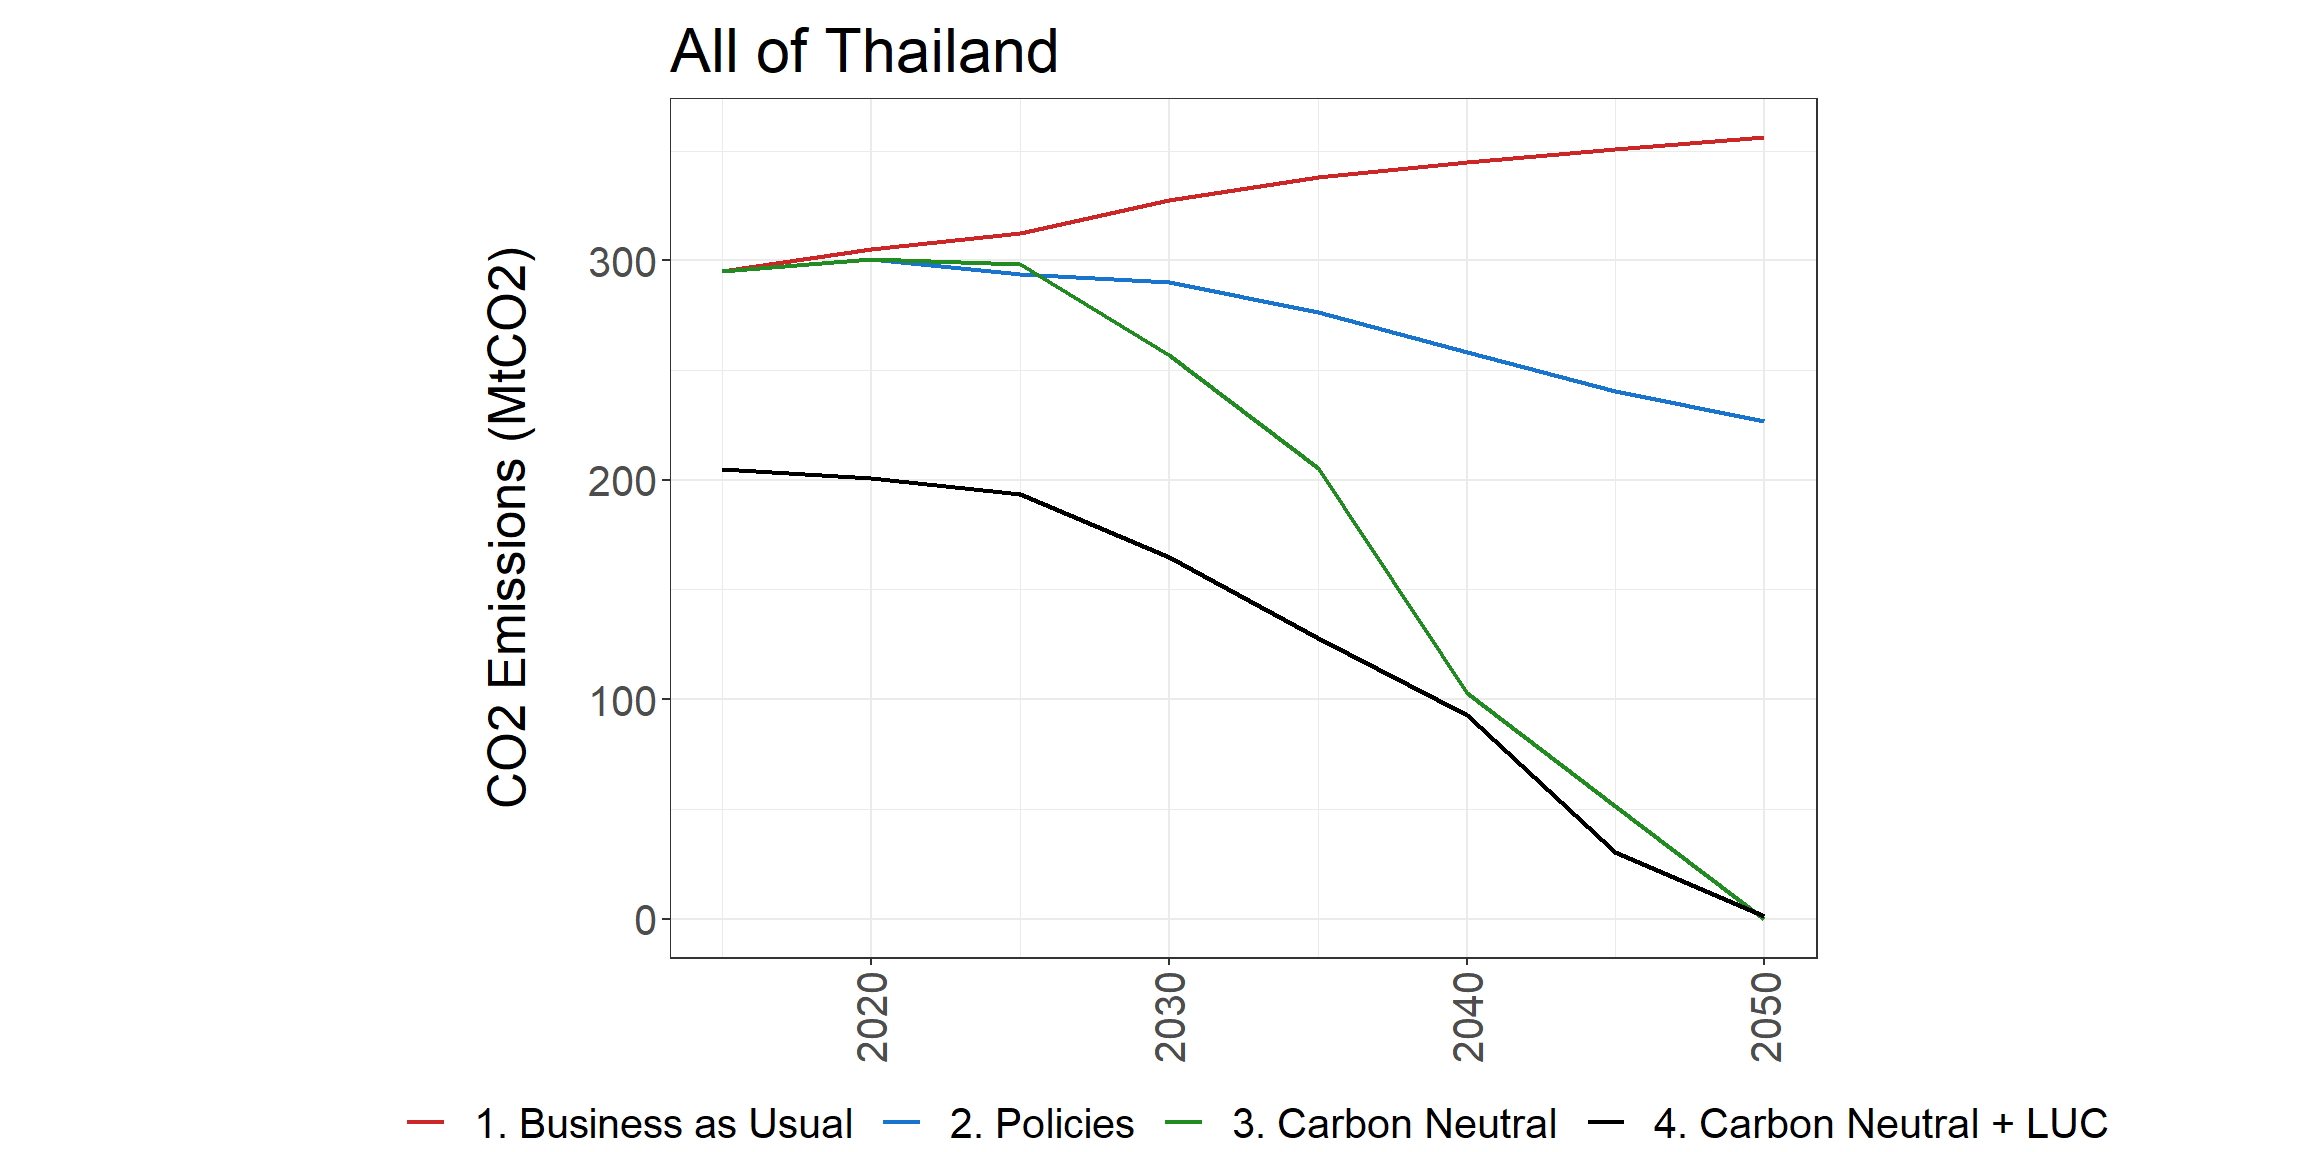 Total national CO2 emissions (left) and GHG emissions (right) in the reference scenario and the low and high policies scenarios